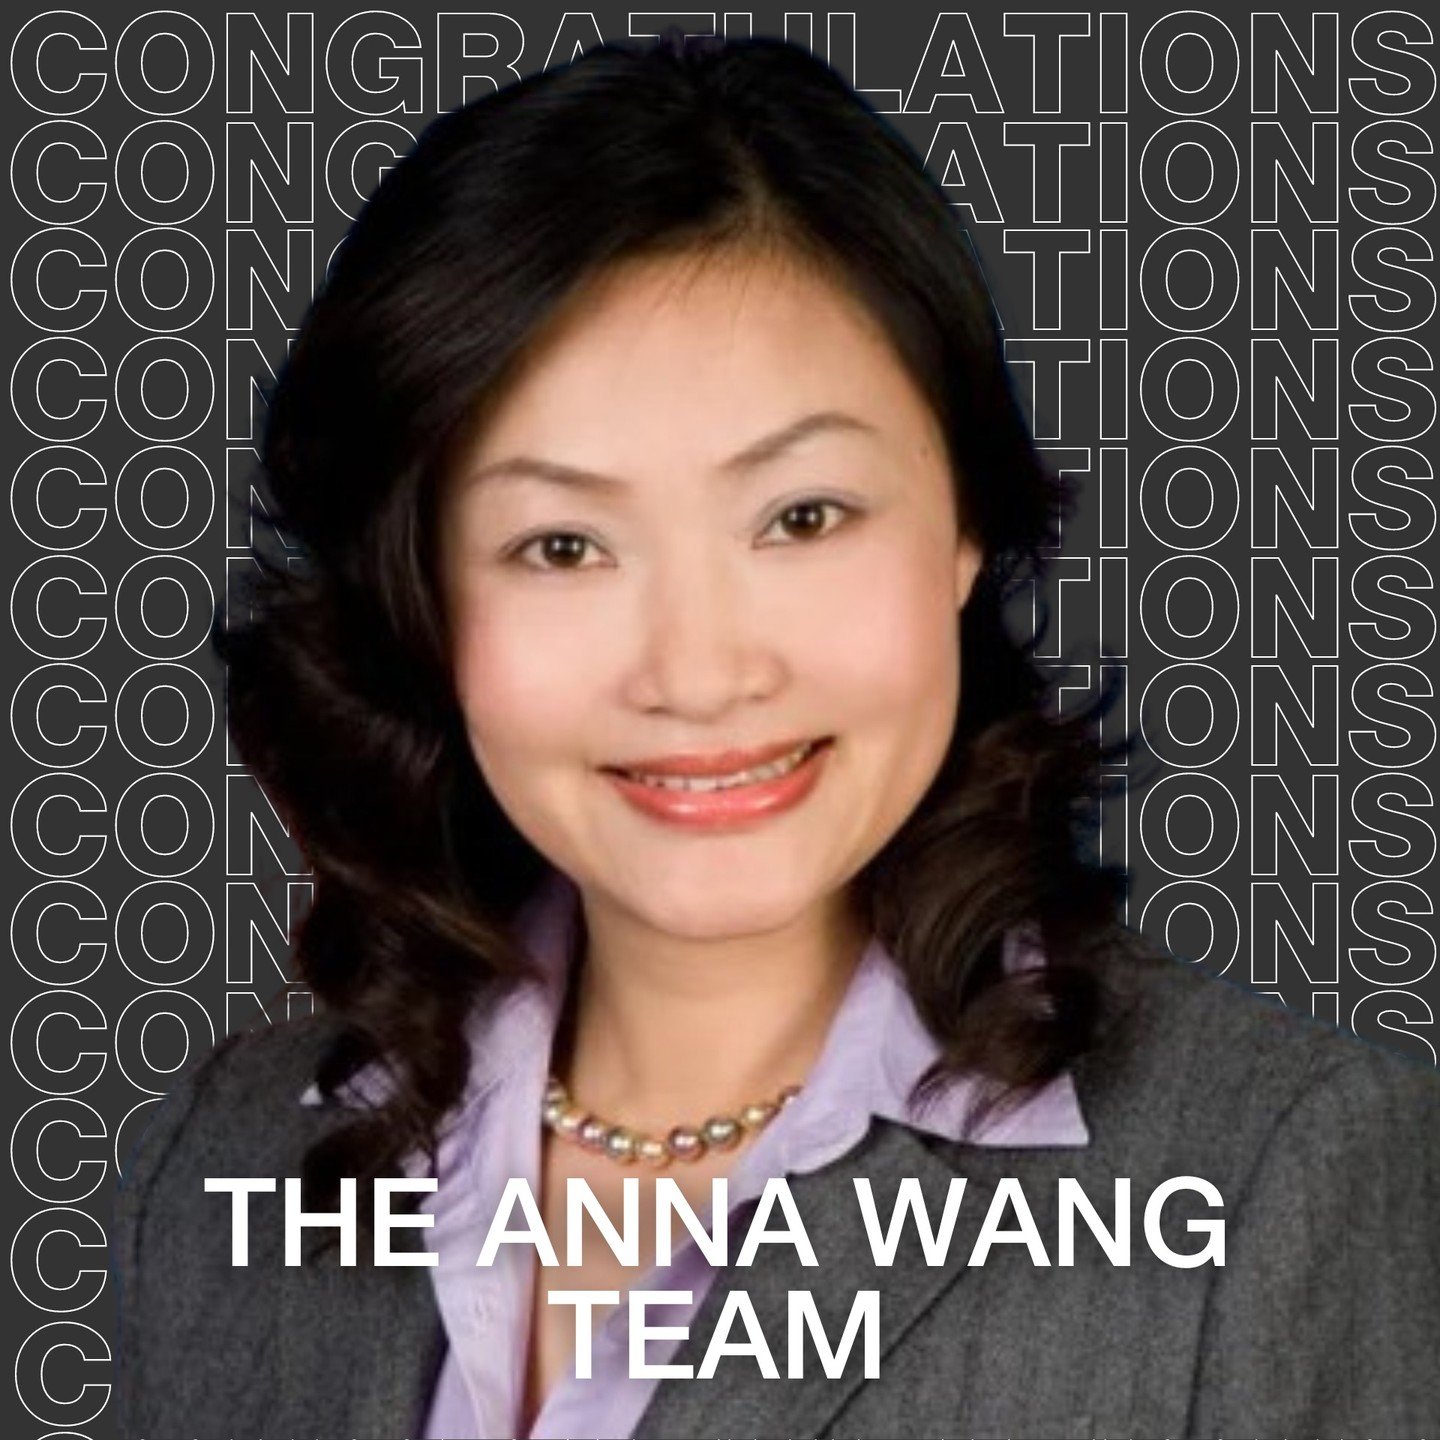 Congratulations to the Anna Wang Team for being awarded TOP TEAMS. Your team's performance places you in the Top 10 KWIE Regionwide. It's truly an honor to be in business with you. #kellerwilliams #pasadena #topagents #awardwinning